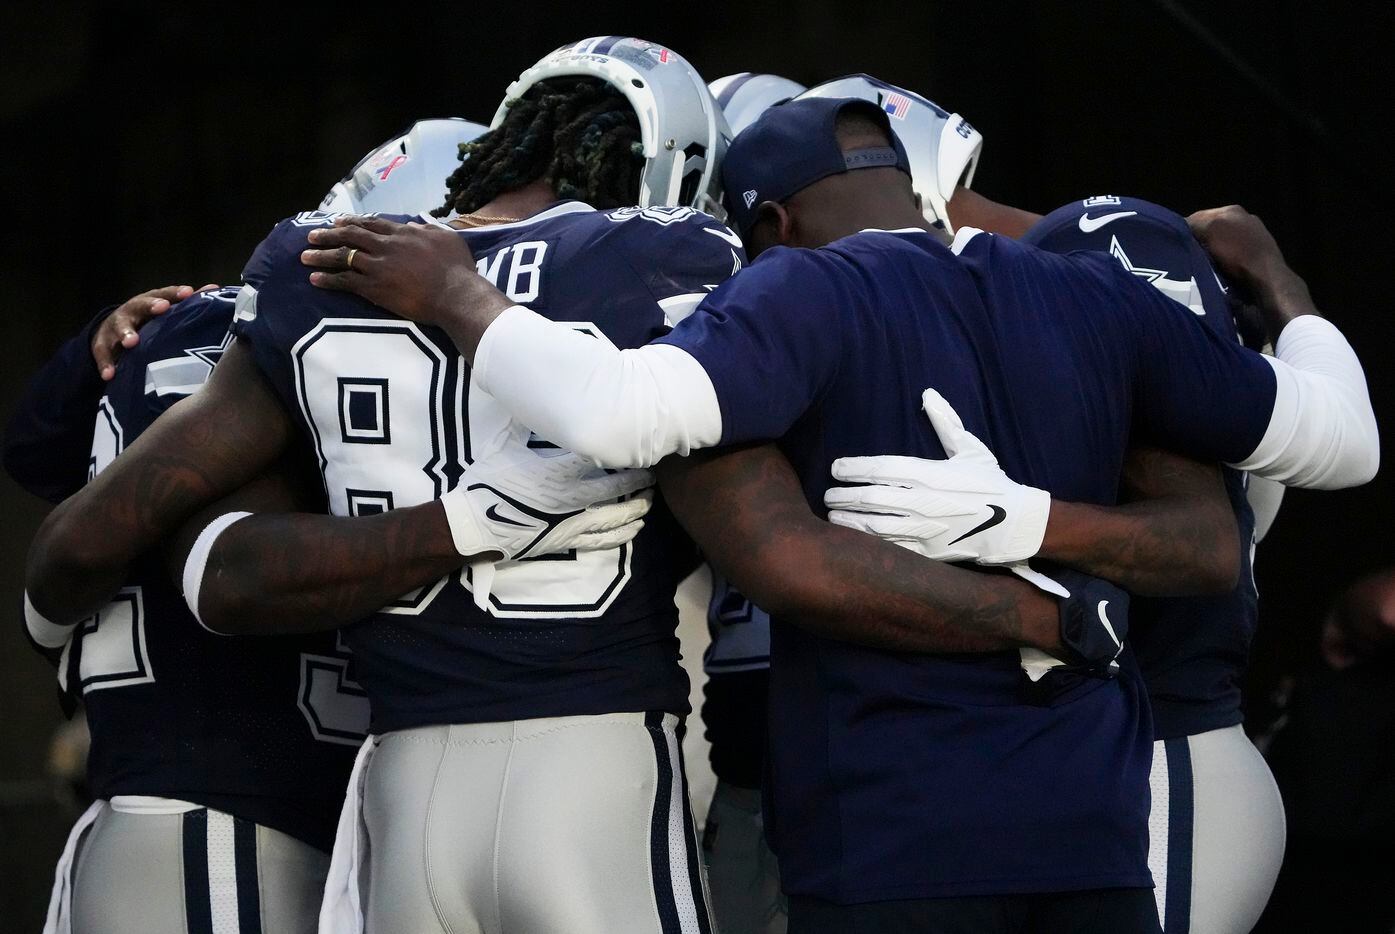 Dallas Cowboys wide receiver CeeDee Lamb joins teammates as they huddle before an NFL football game against the Tampa Bay Buccaneers at Raymond James Stadium on Thursday, Sept. 9, 2021, in Tampa, Fla. (Smiley N. Pool/The Dallas Morning News)